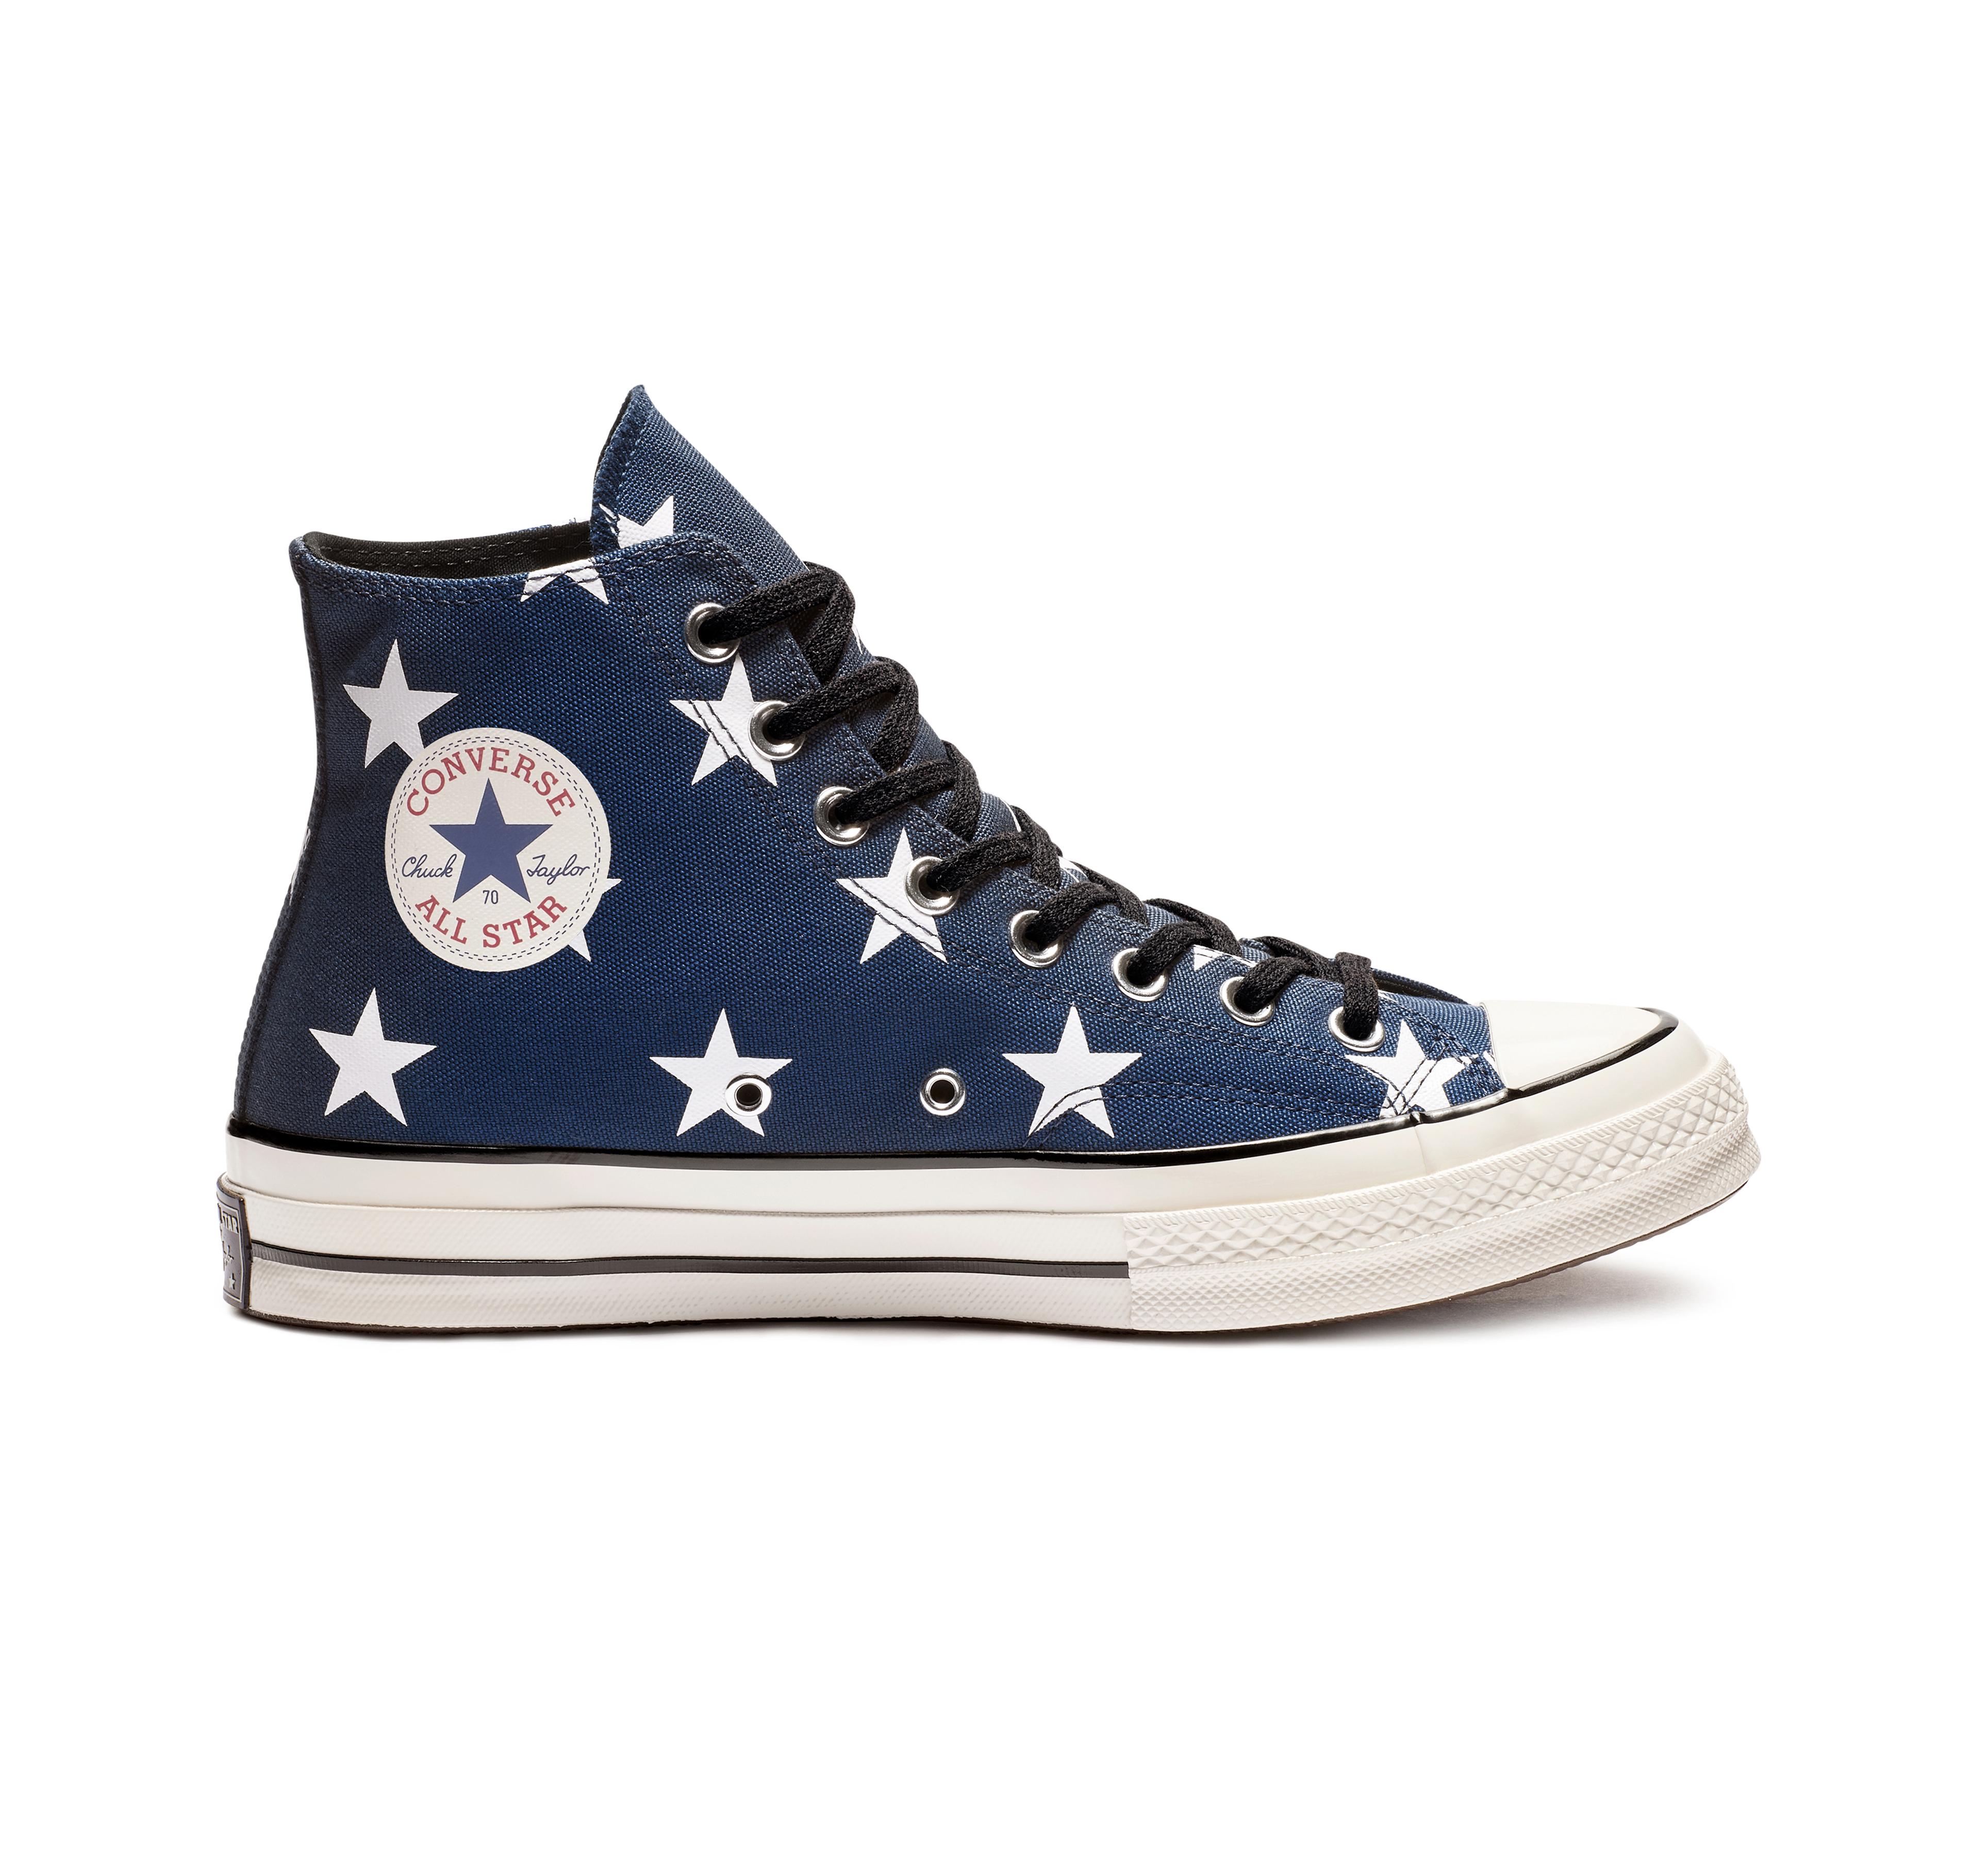 Converse Chuck 70 Archive Print High Top in Blue for Men - Lyst